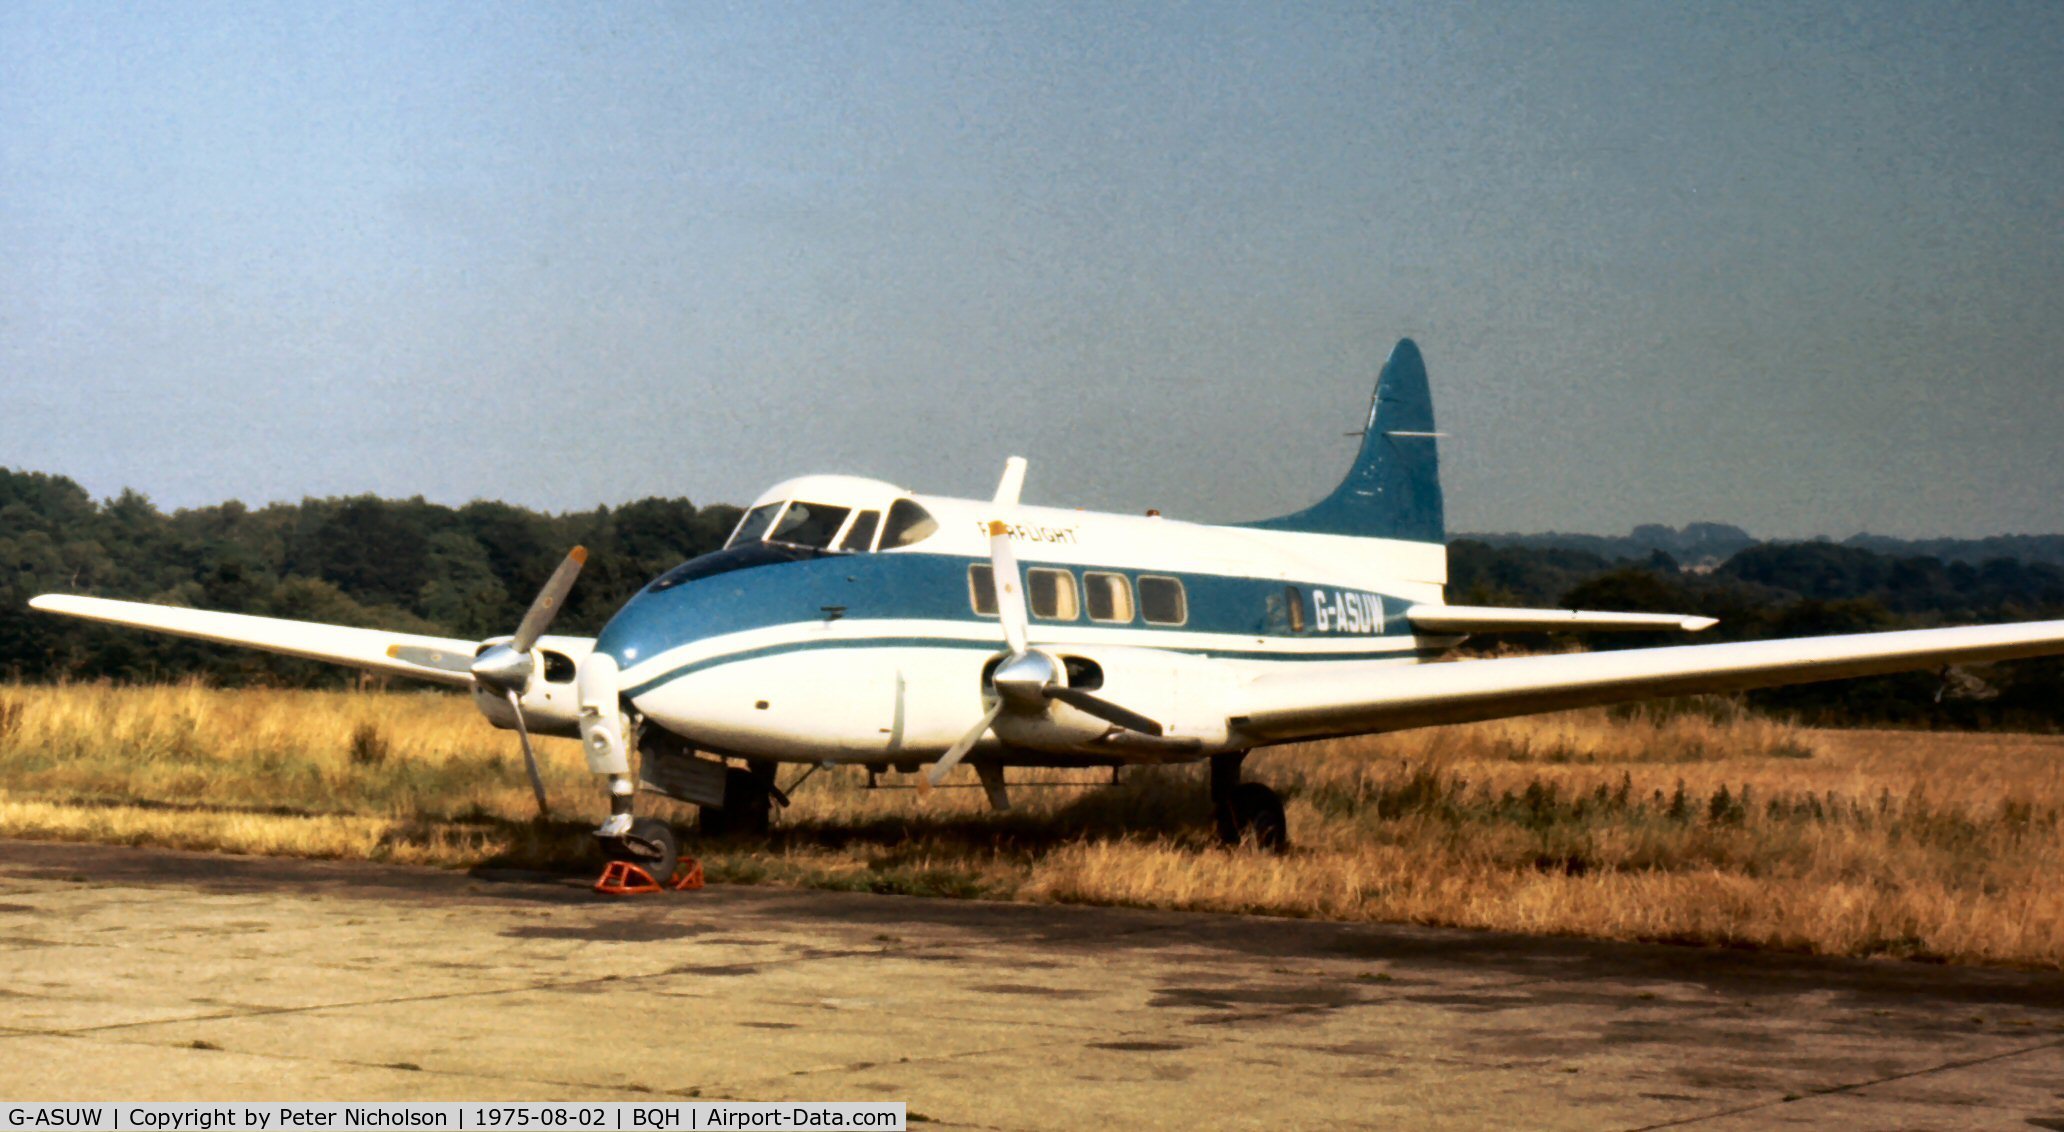 G-ASUW, 1949 De Havilland DH-104 Dove 1A C/N 04256, This Riley Dove of Fairflight Charters was seen at Biggin Hill in the Summer of 1975.